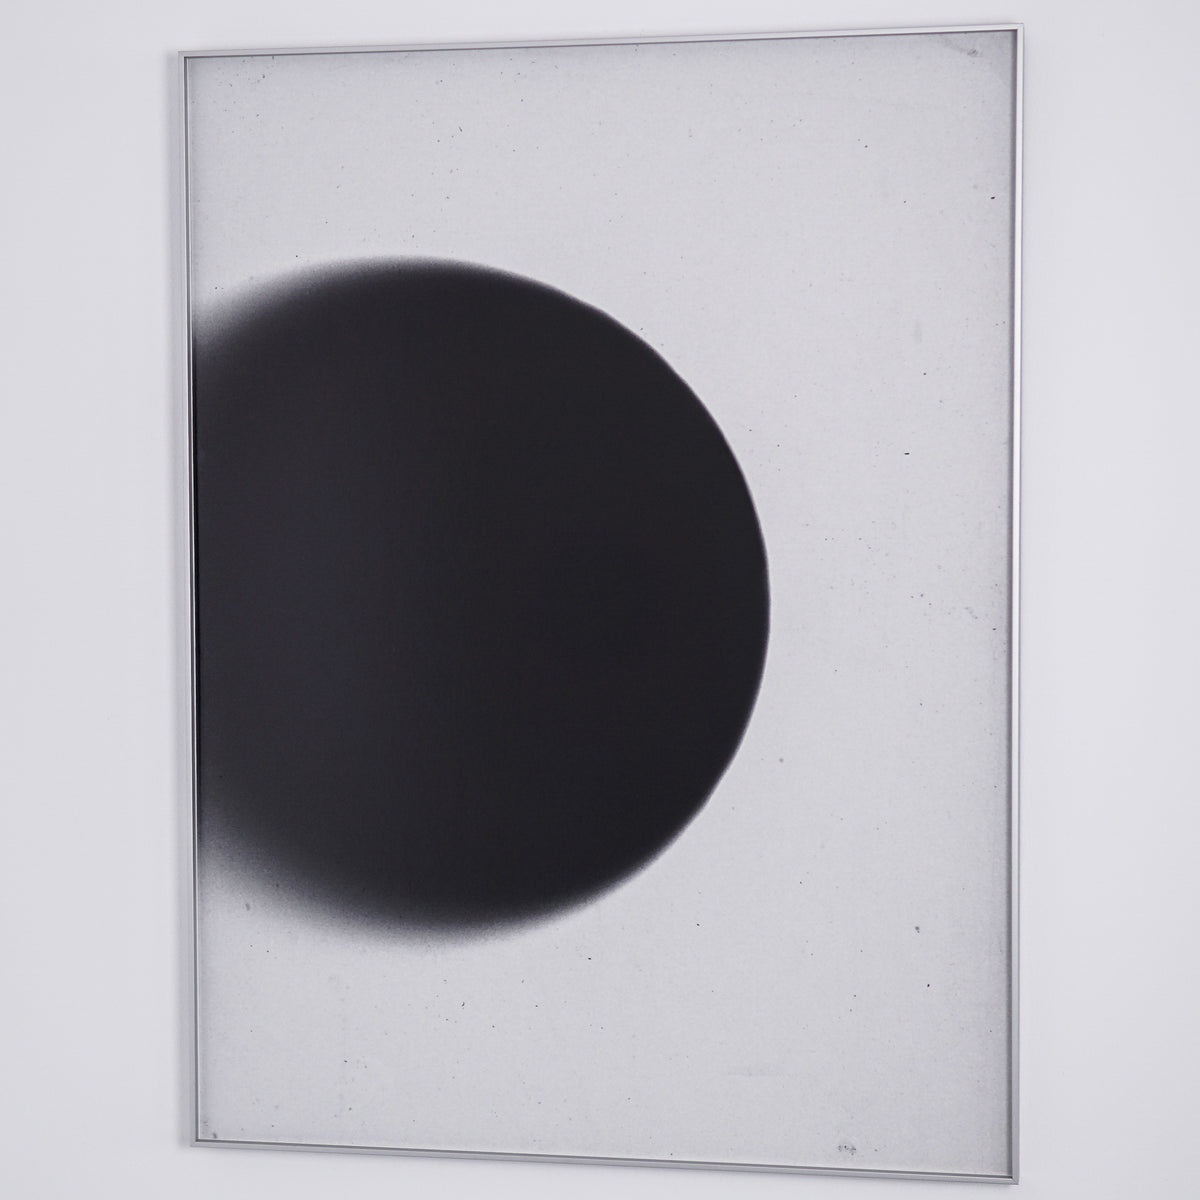 Inês Mendes Leal | #126 | 2021 | Pigment inkjet print on barite paper | Ungoing sun series | 102 x 76,5 cm